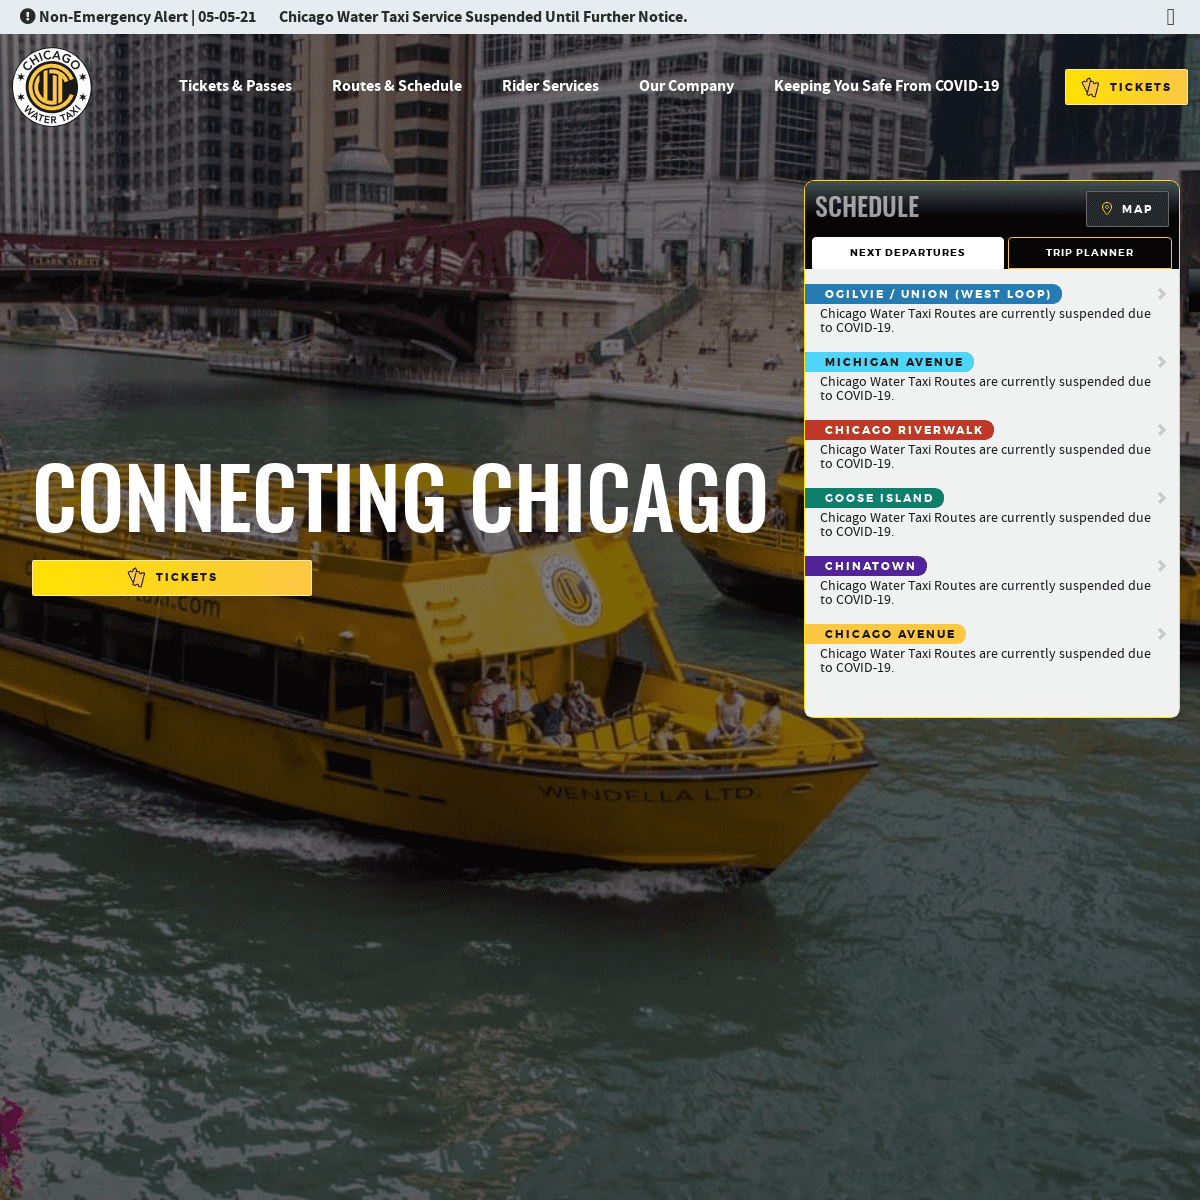 A complete backup of https://chicagowatertaxi.com